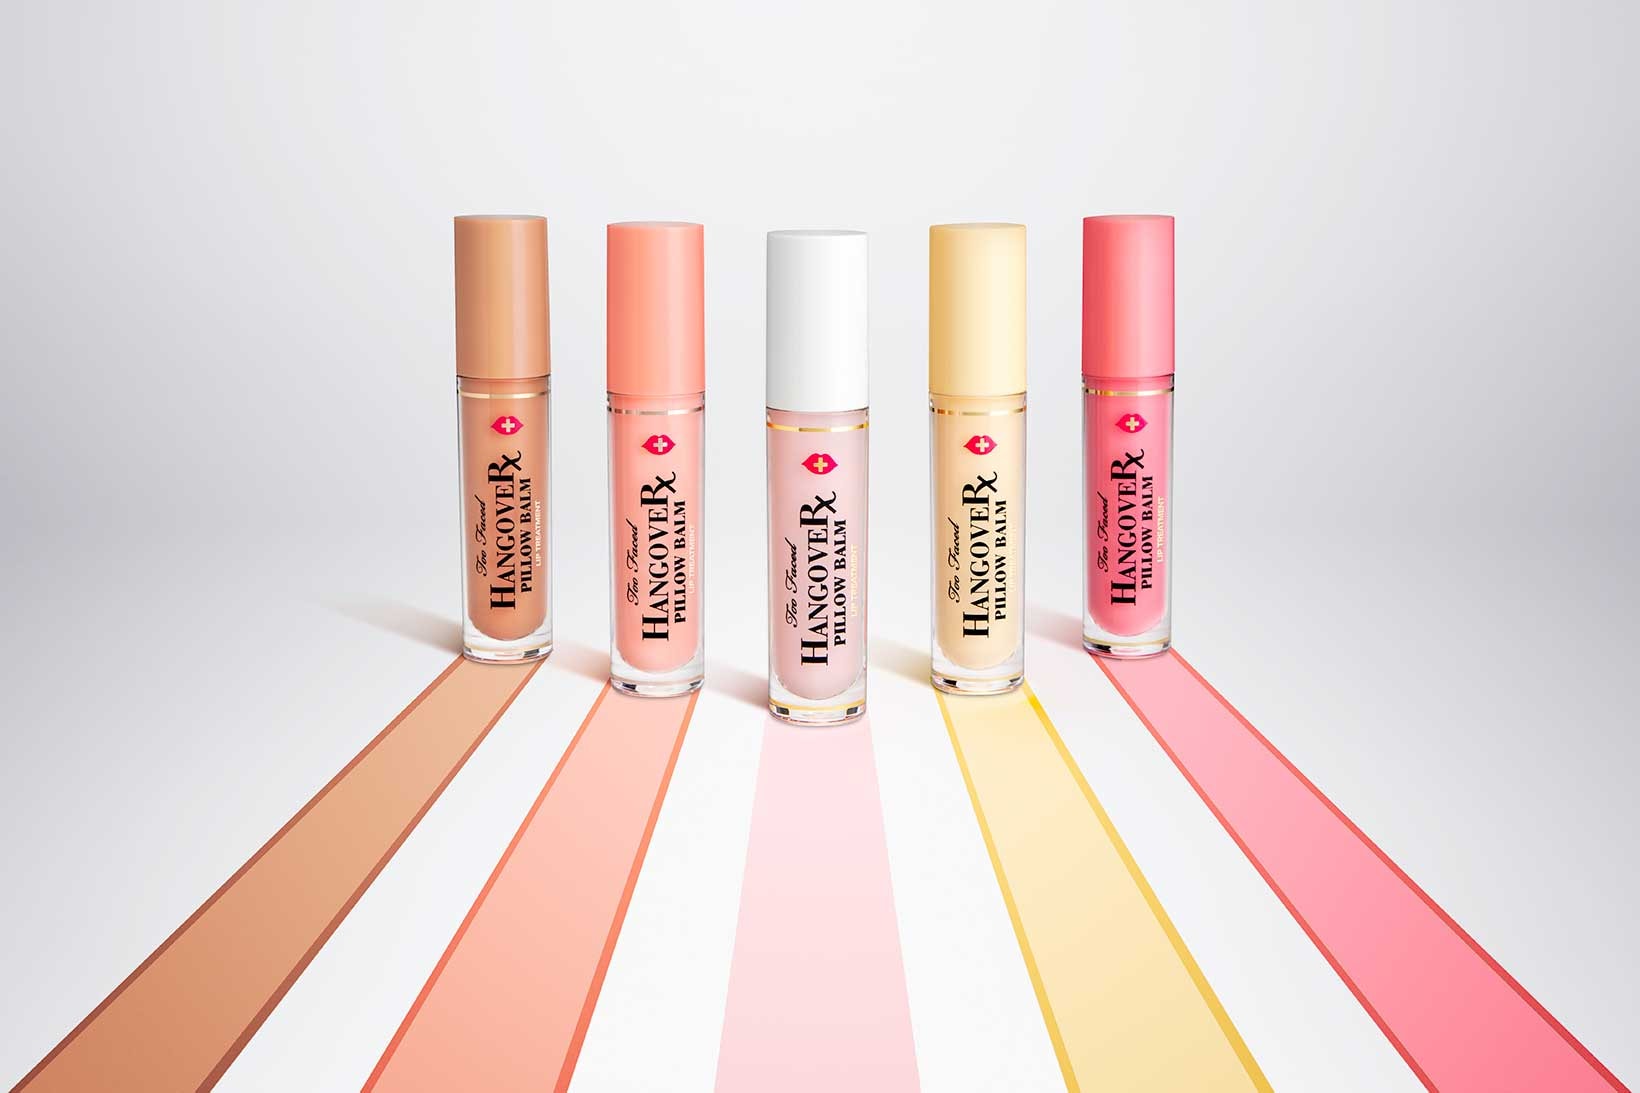 Lip gloss scuba is gorgeous and is giving me all the summer feels